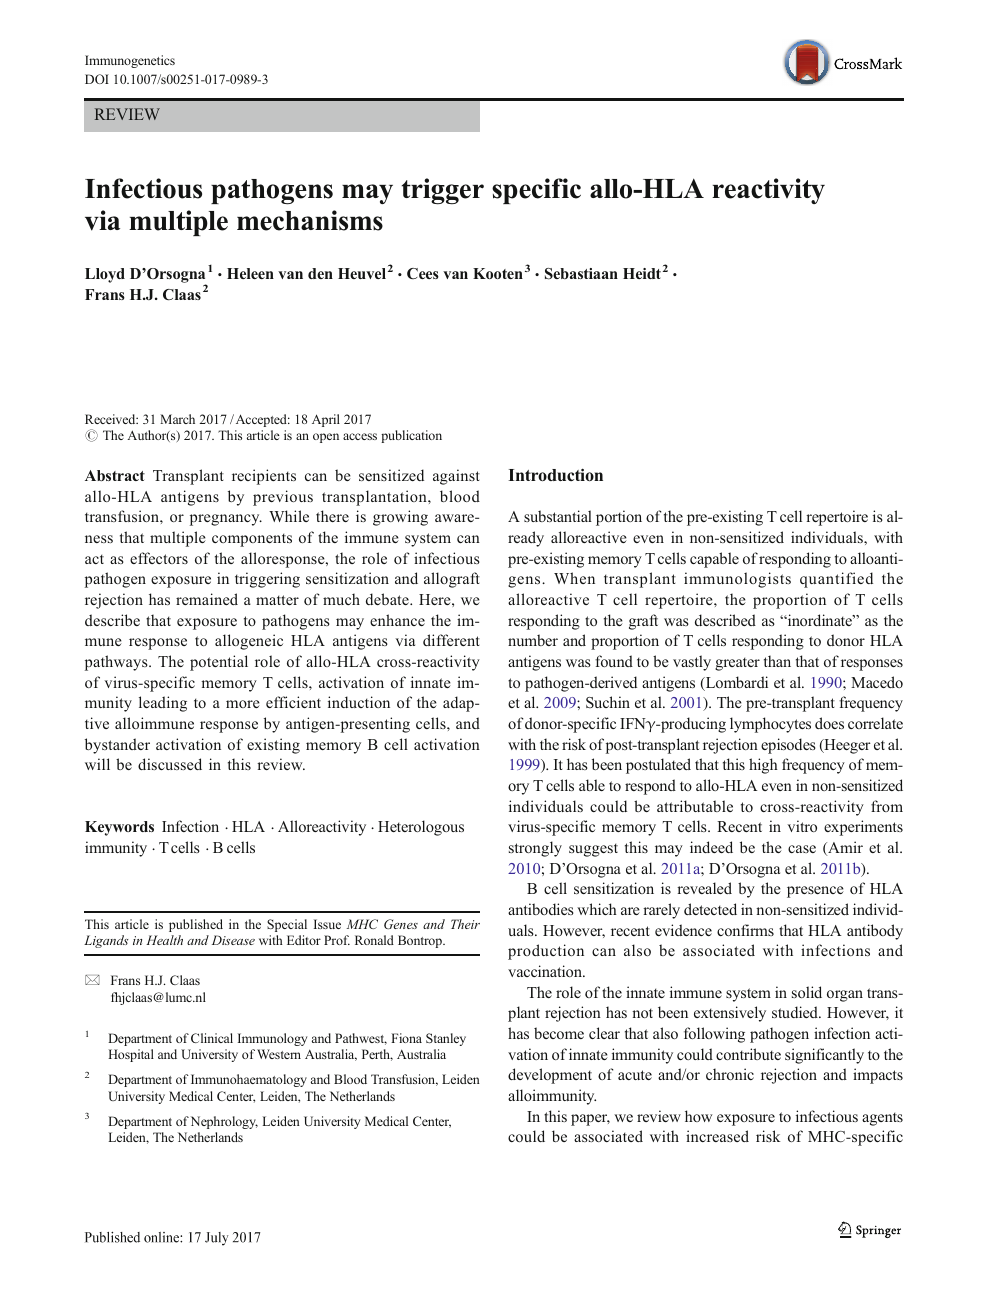 Infectious Pathogens May Trigger Specific Allo Hla Reactivity Via Multiple Mechanisms Topic Of Research Paper In Biological Sciences Download Scholarly Article Pdf And Read For Free On Cyberleninka Open Science Hub